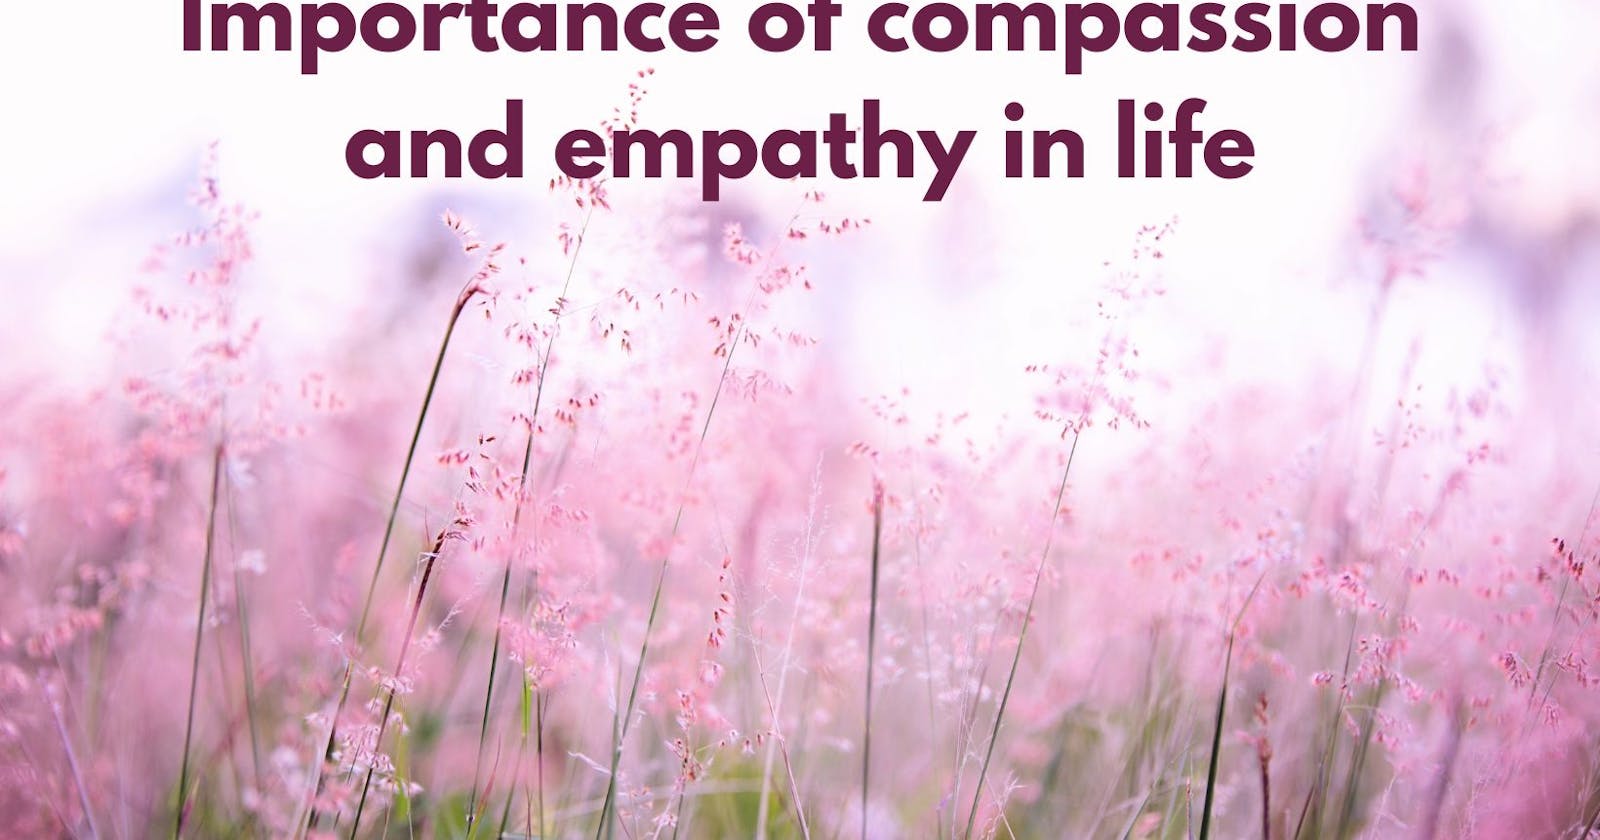 Importance of compassion and empathy in life